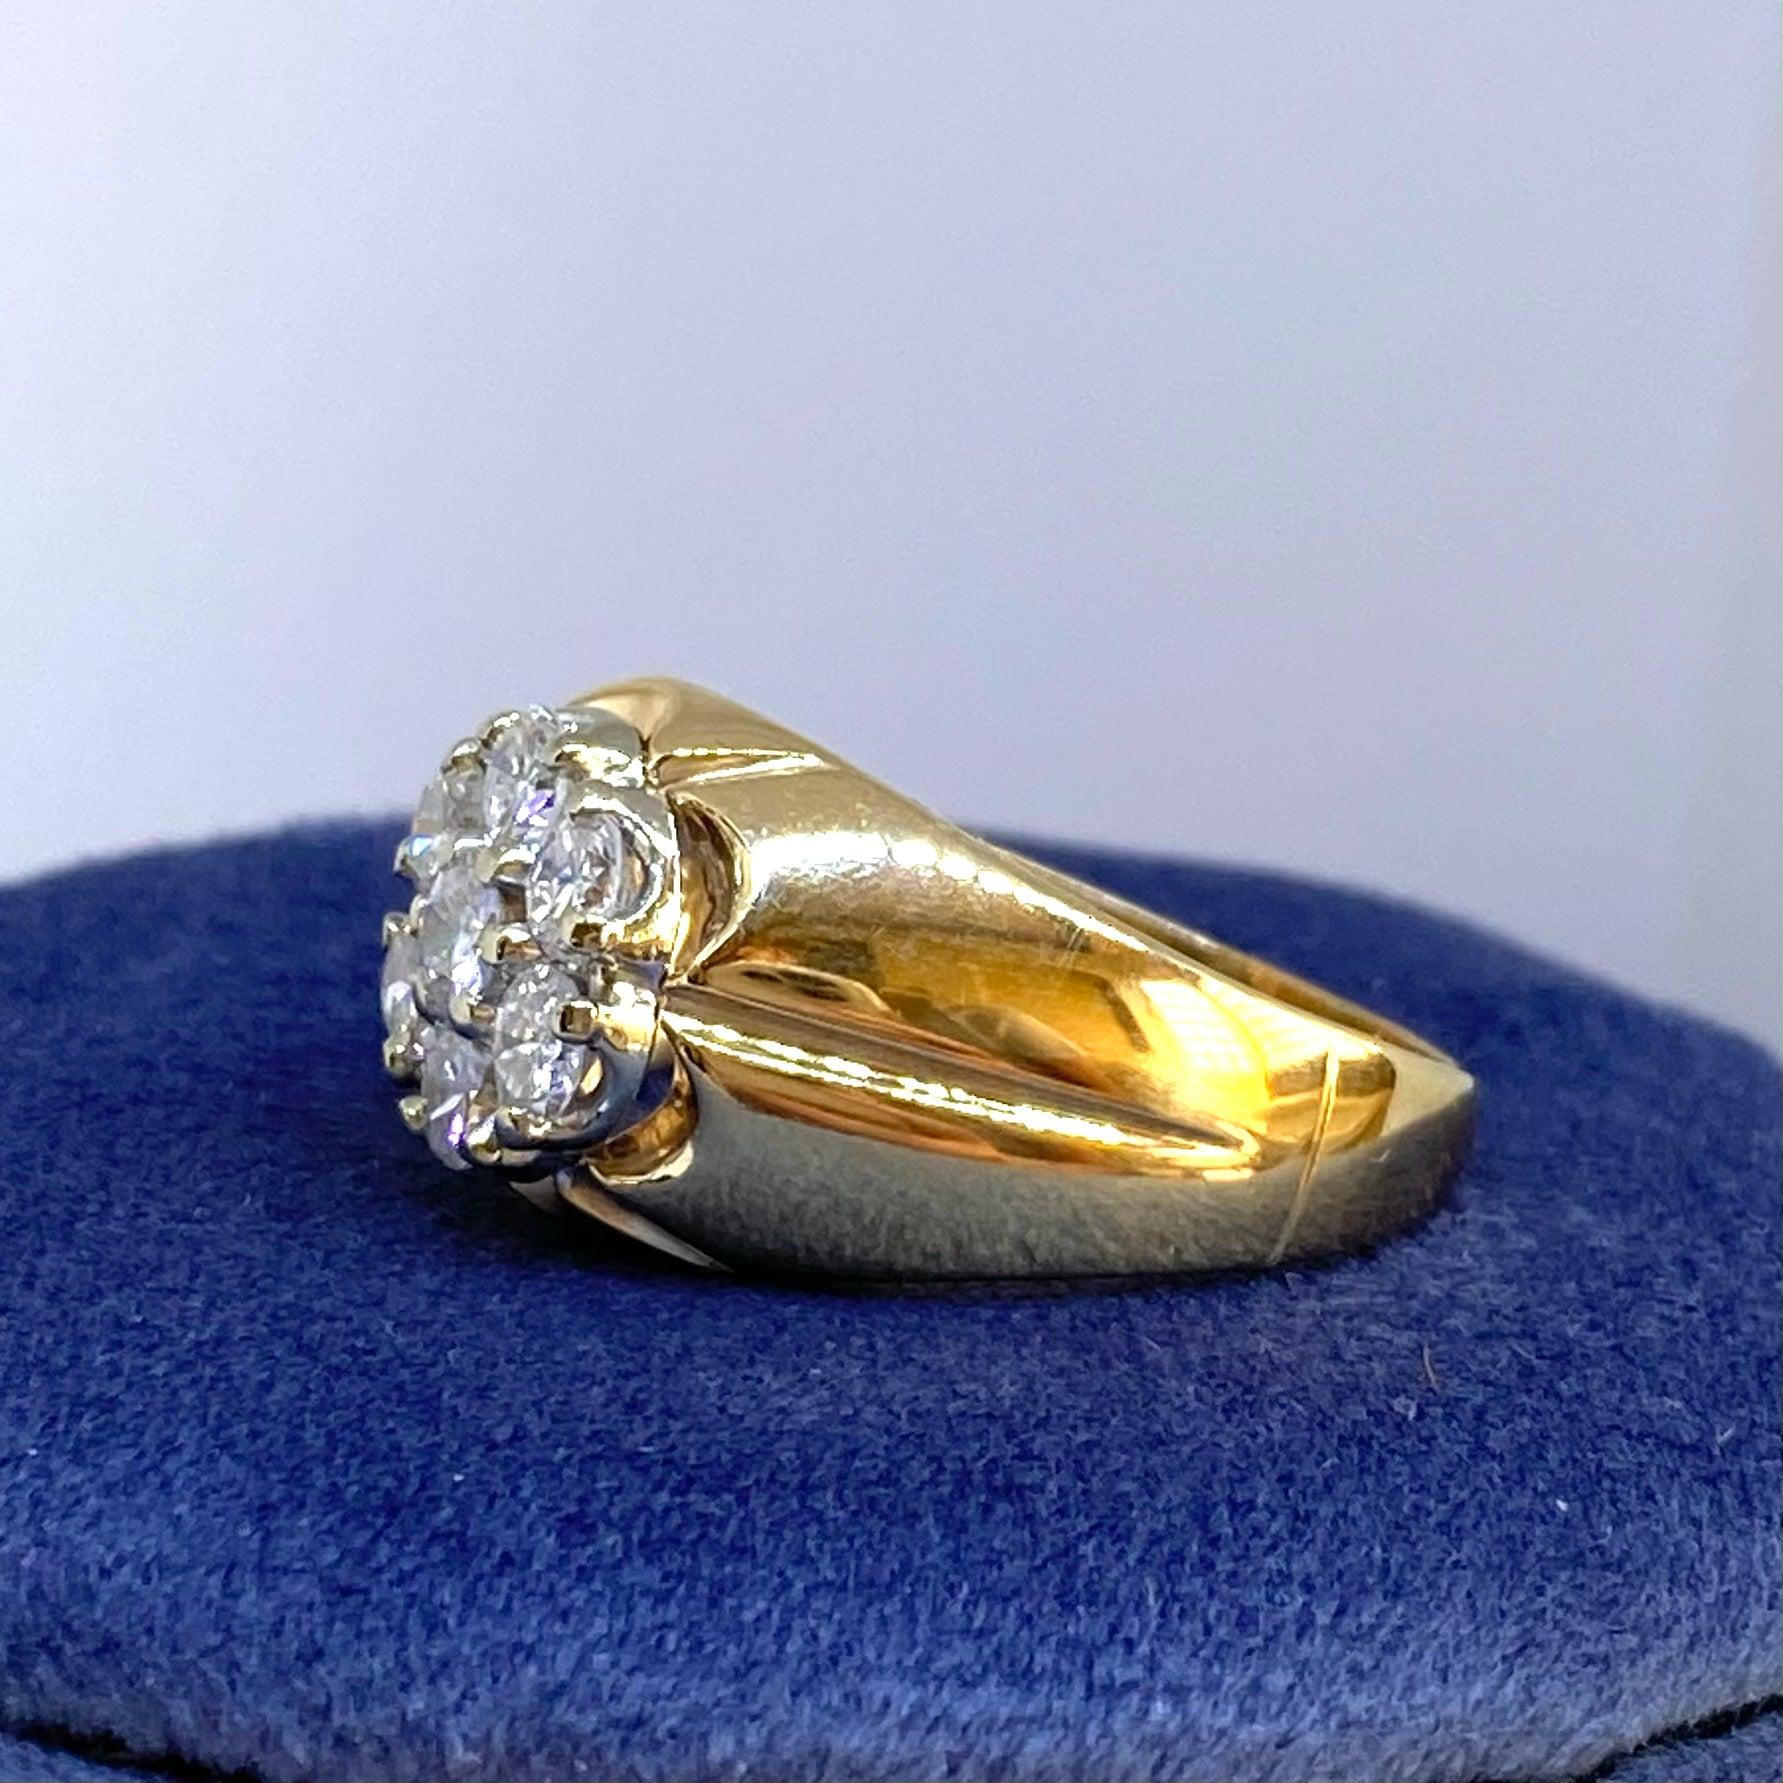 Crafted in 14K gold, the ring features a seven stone diamond floret cluster set in white gold set within a scalloped yellow gold bezel, supported by beveled shoulders and a 2.5mm wide band.
7 round brilliant cut diamonds: 1.00cttw. Color: G-H,